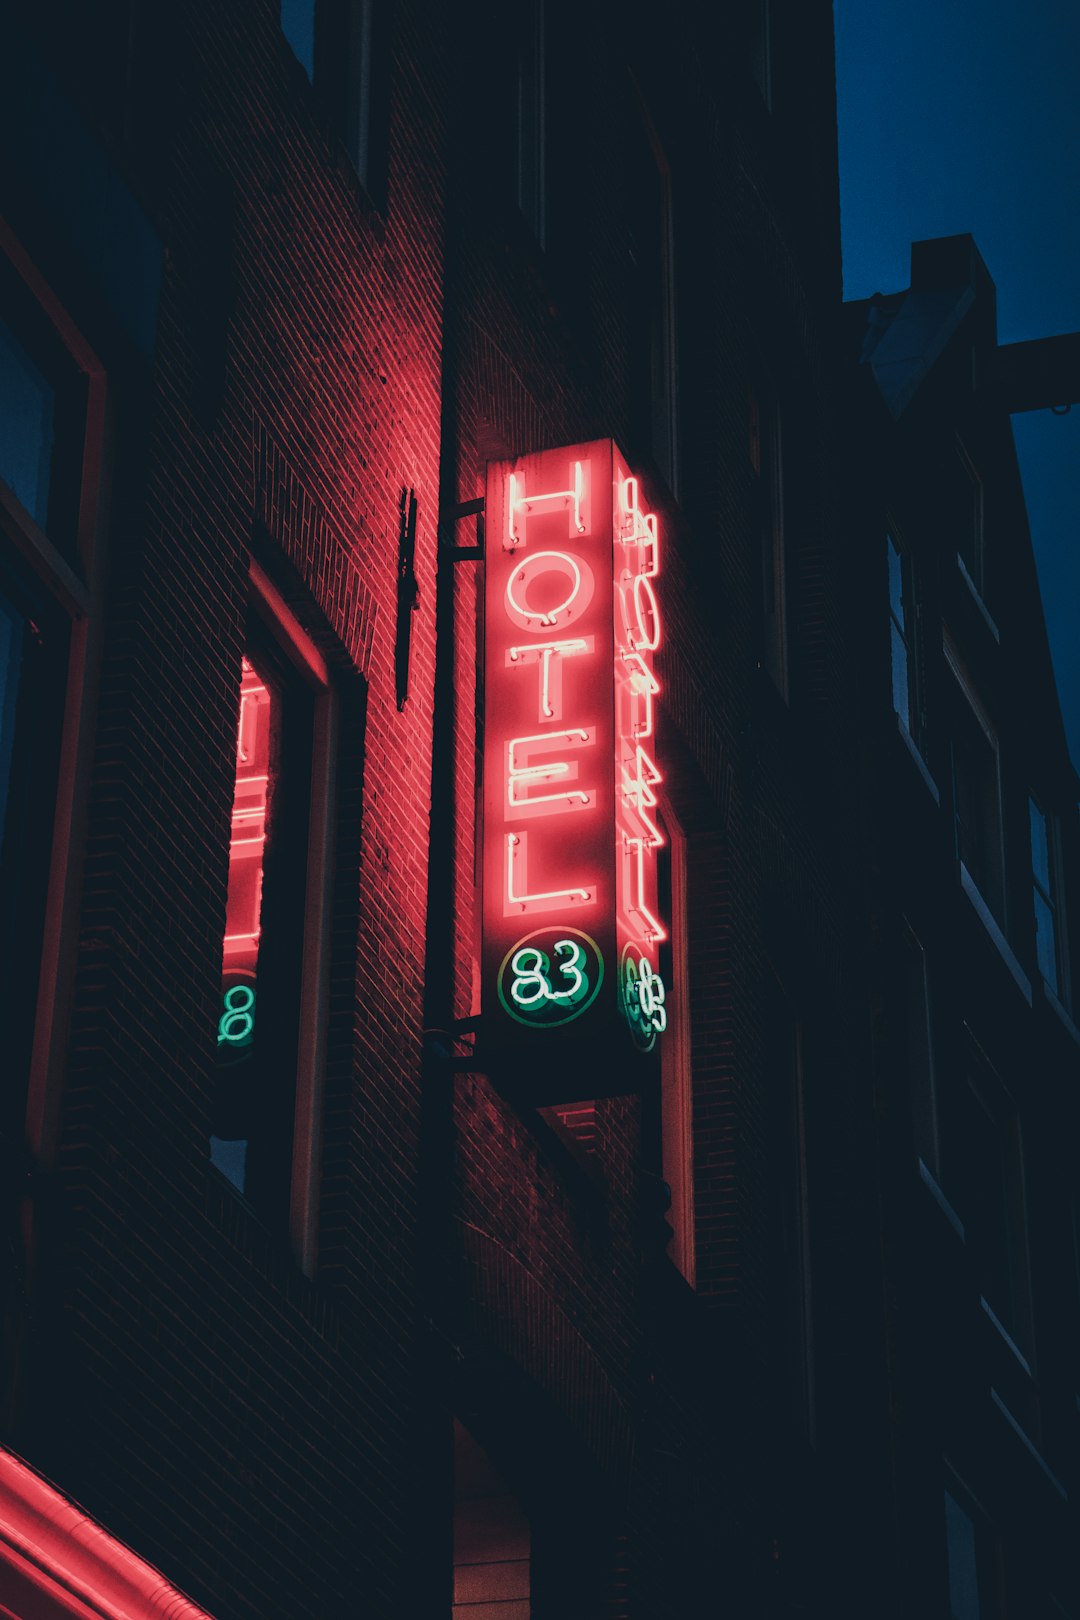 lighted hotel 83 neon signage